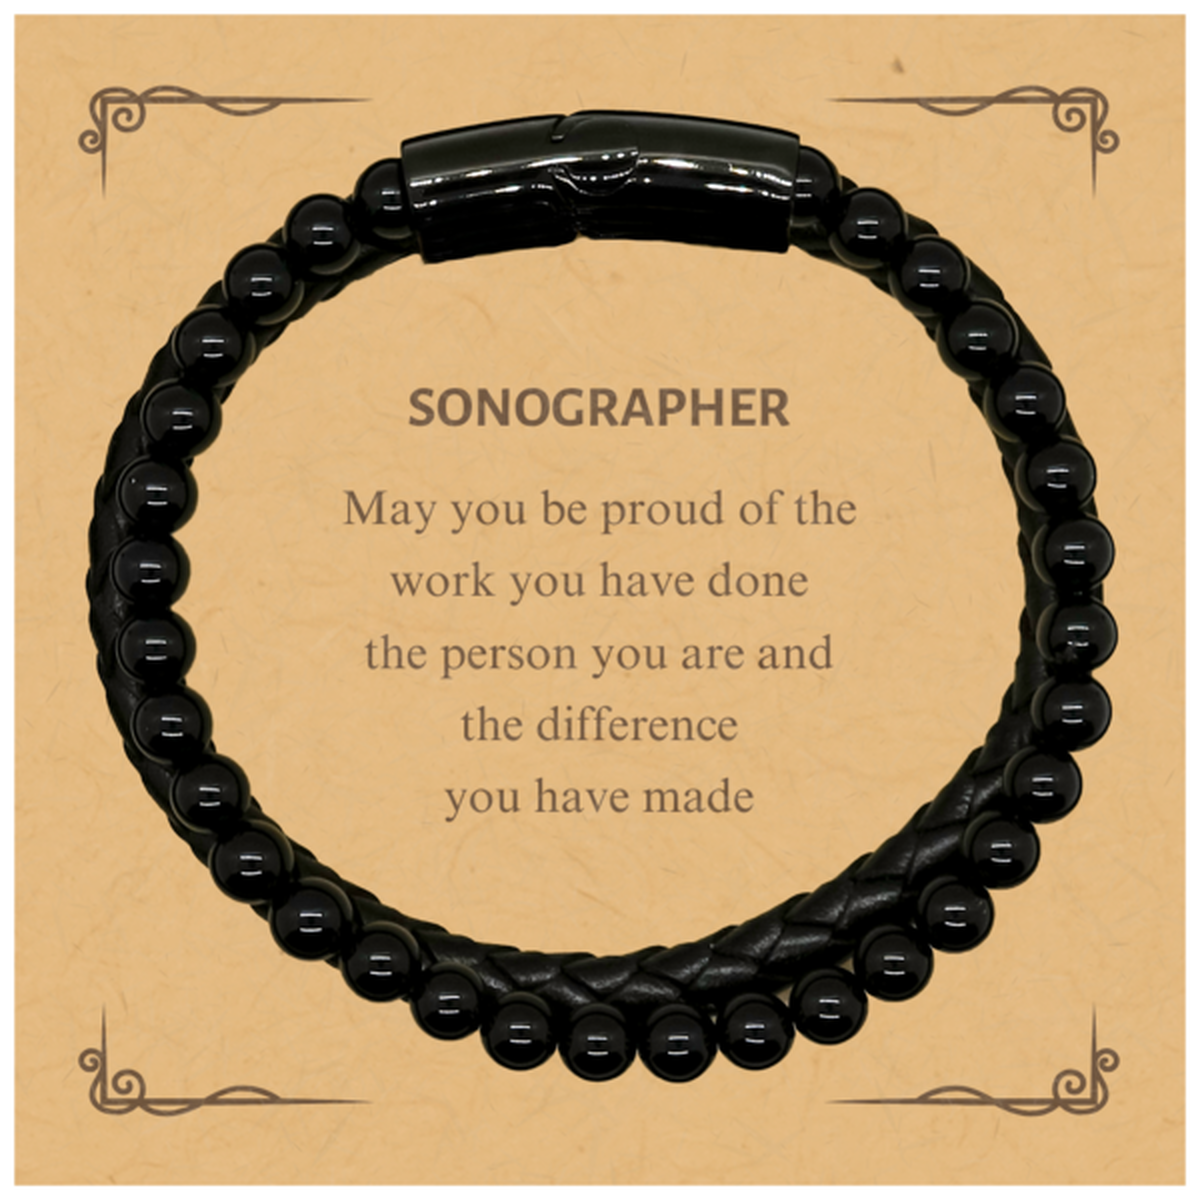 Sonographer May you be proud of the work you have done, Retirement Sonographer Stone Leather Bracelets for Colleague Appreciation Gifts Amazing for Sonographer